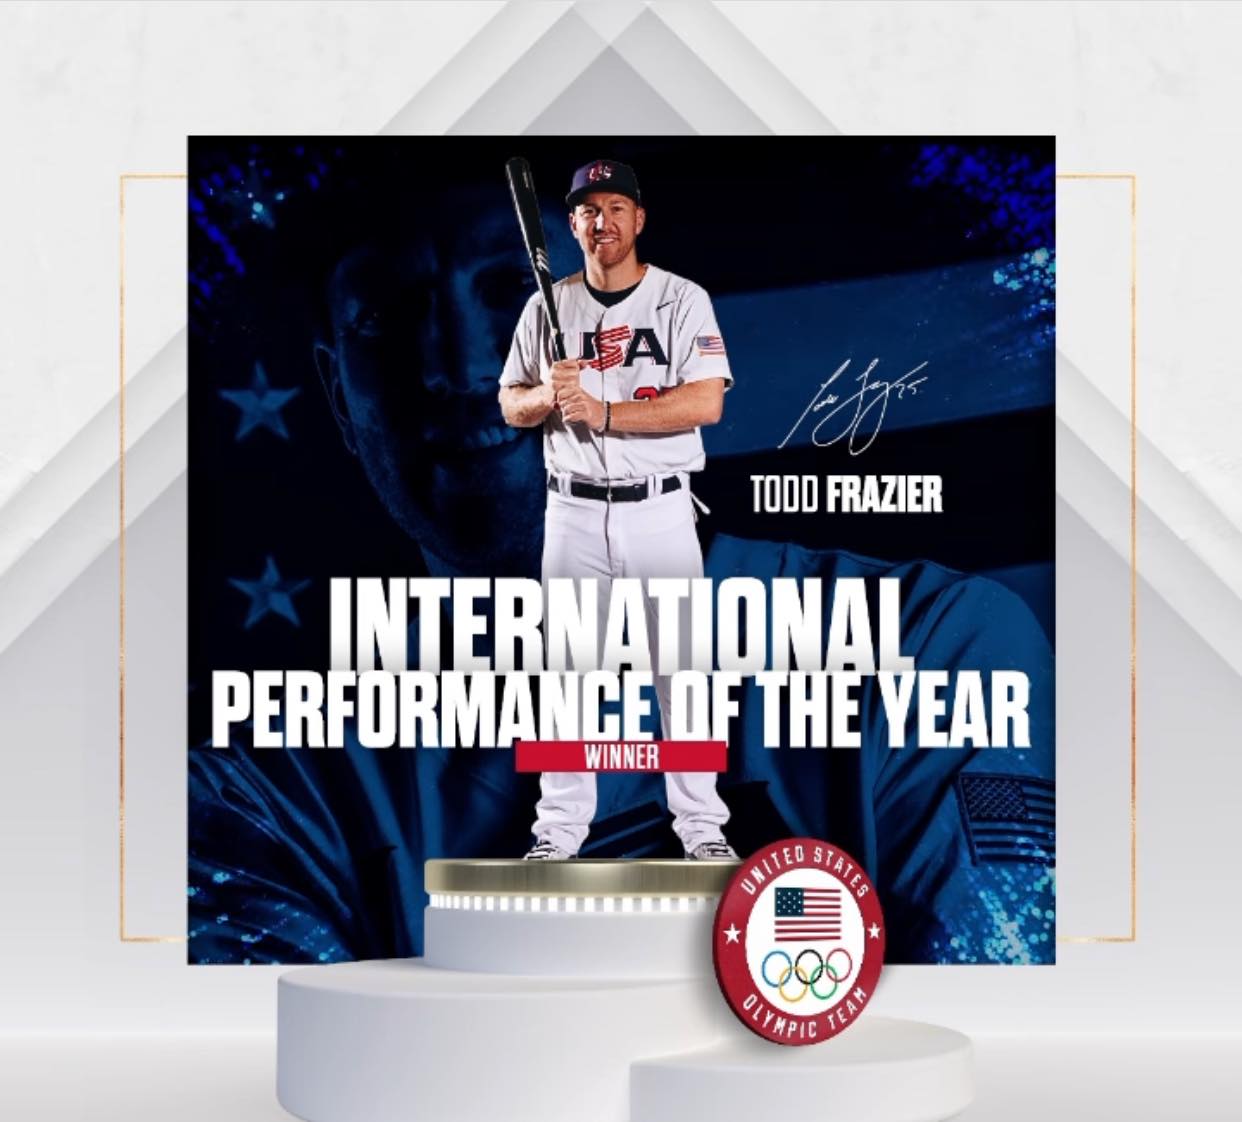 Todd Frazier of Toms River Receives International Performance of